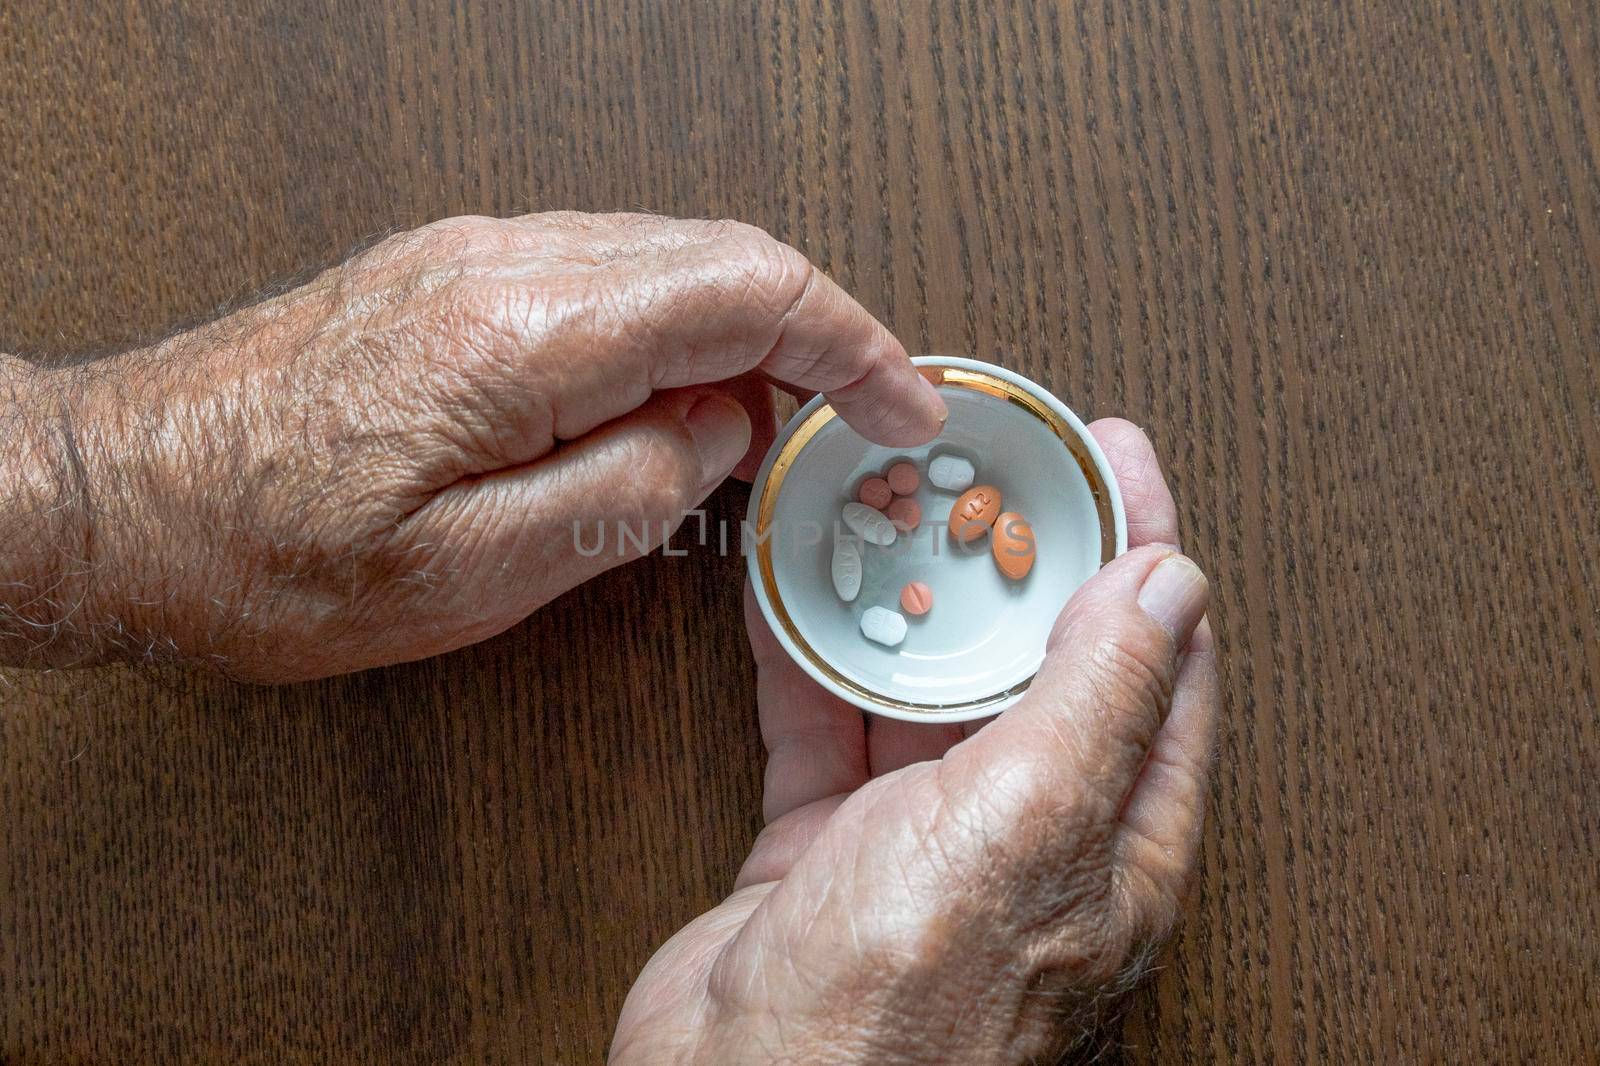 An elderly man holding a cup of pills in his hands selects the desired pill from it